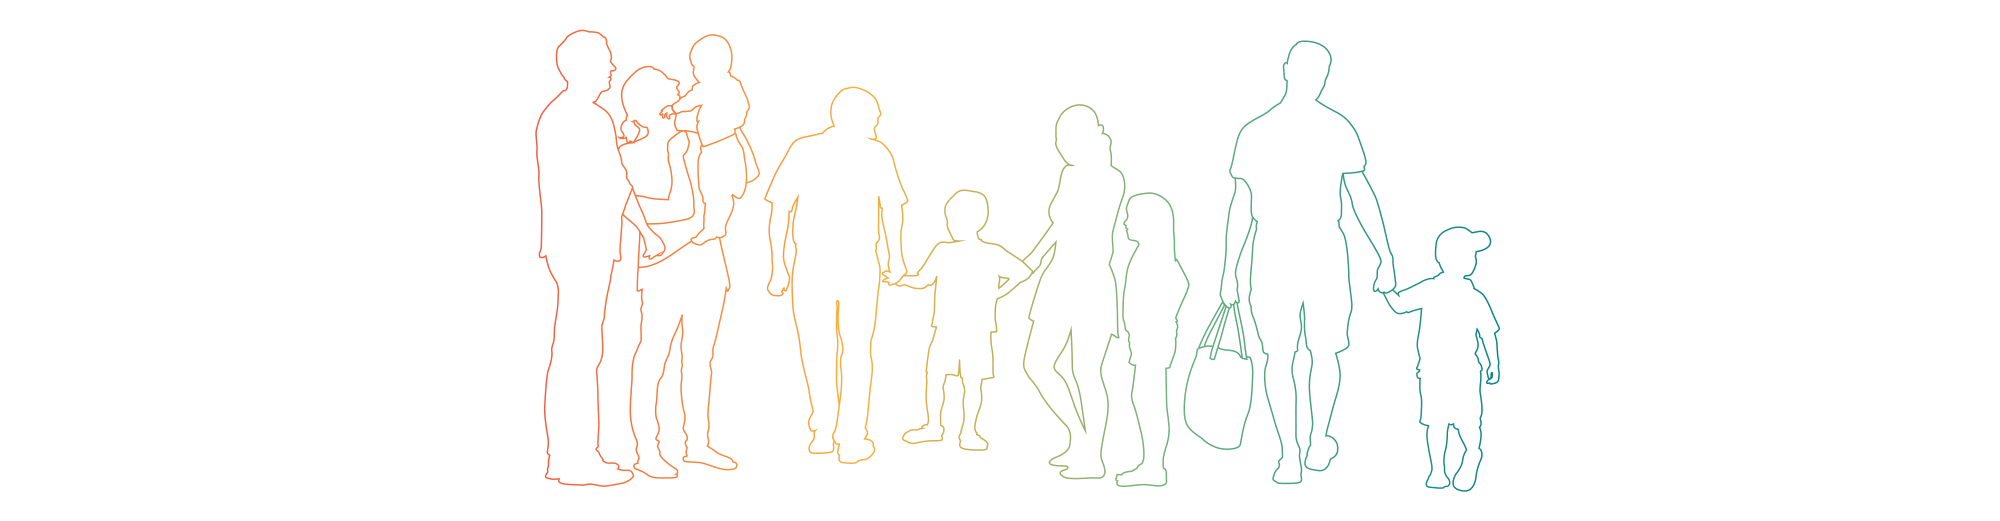 Rainbow outline of intergenerational people.